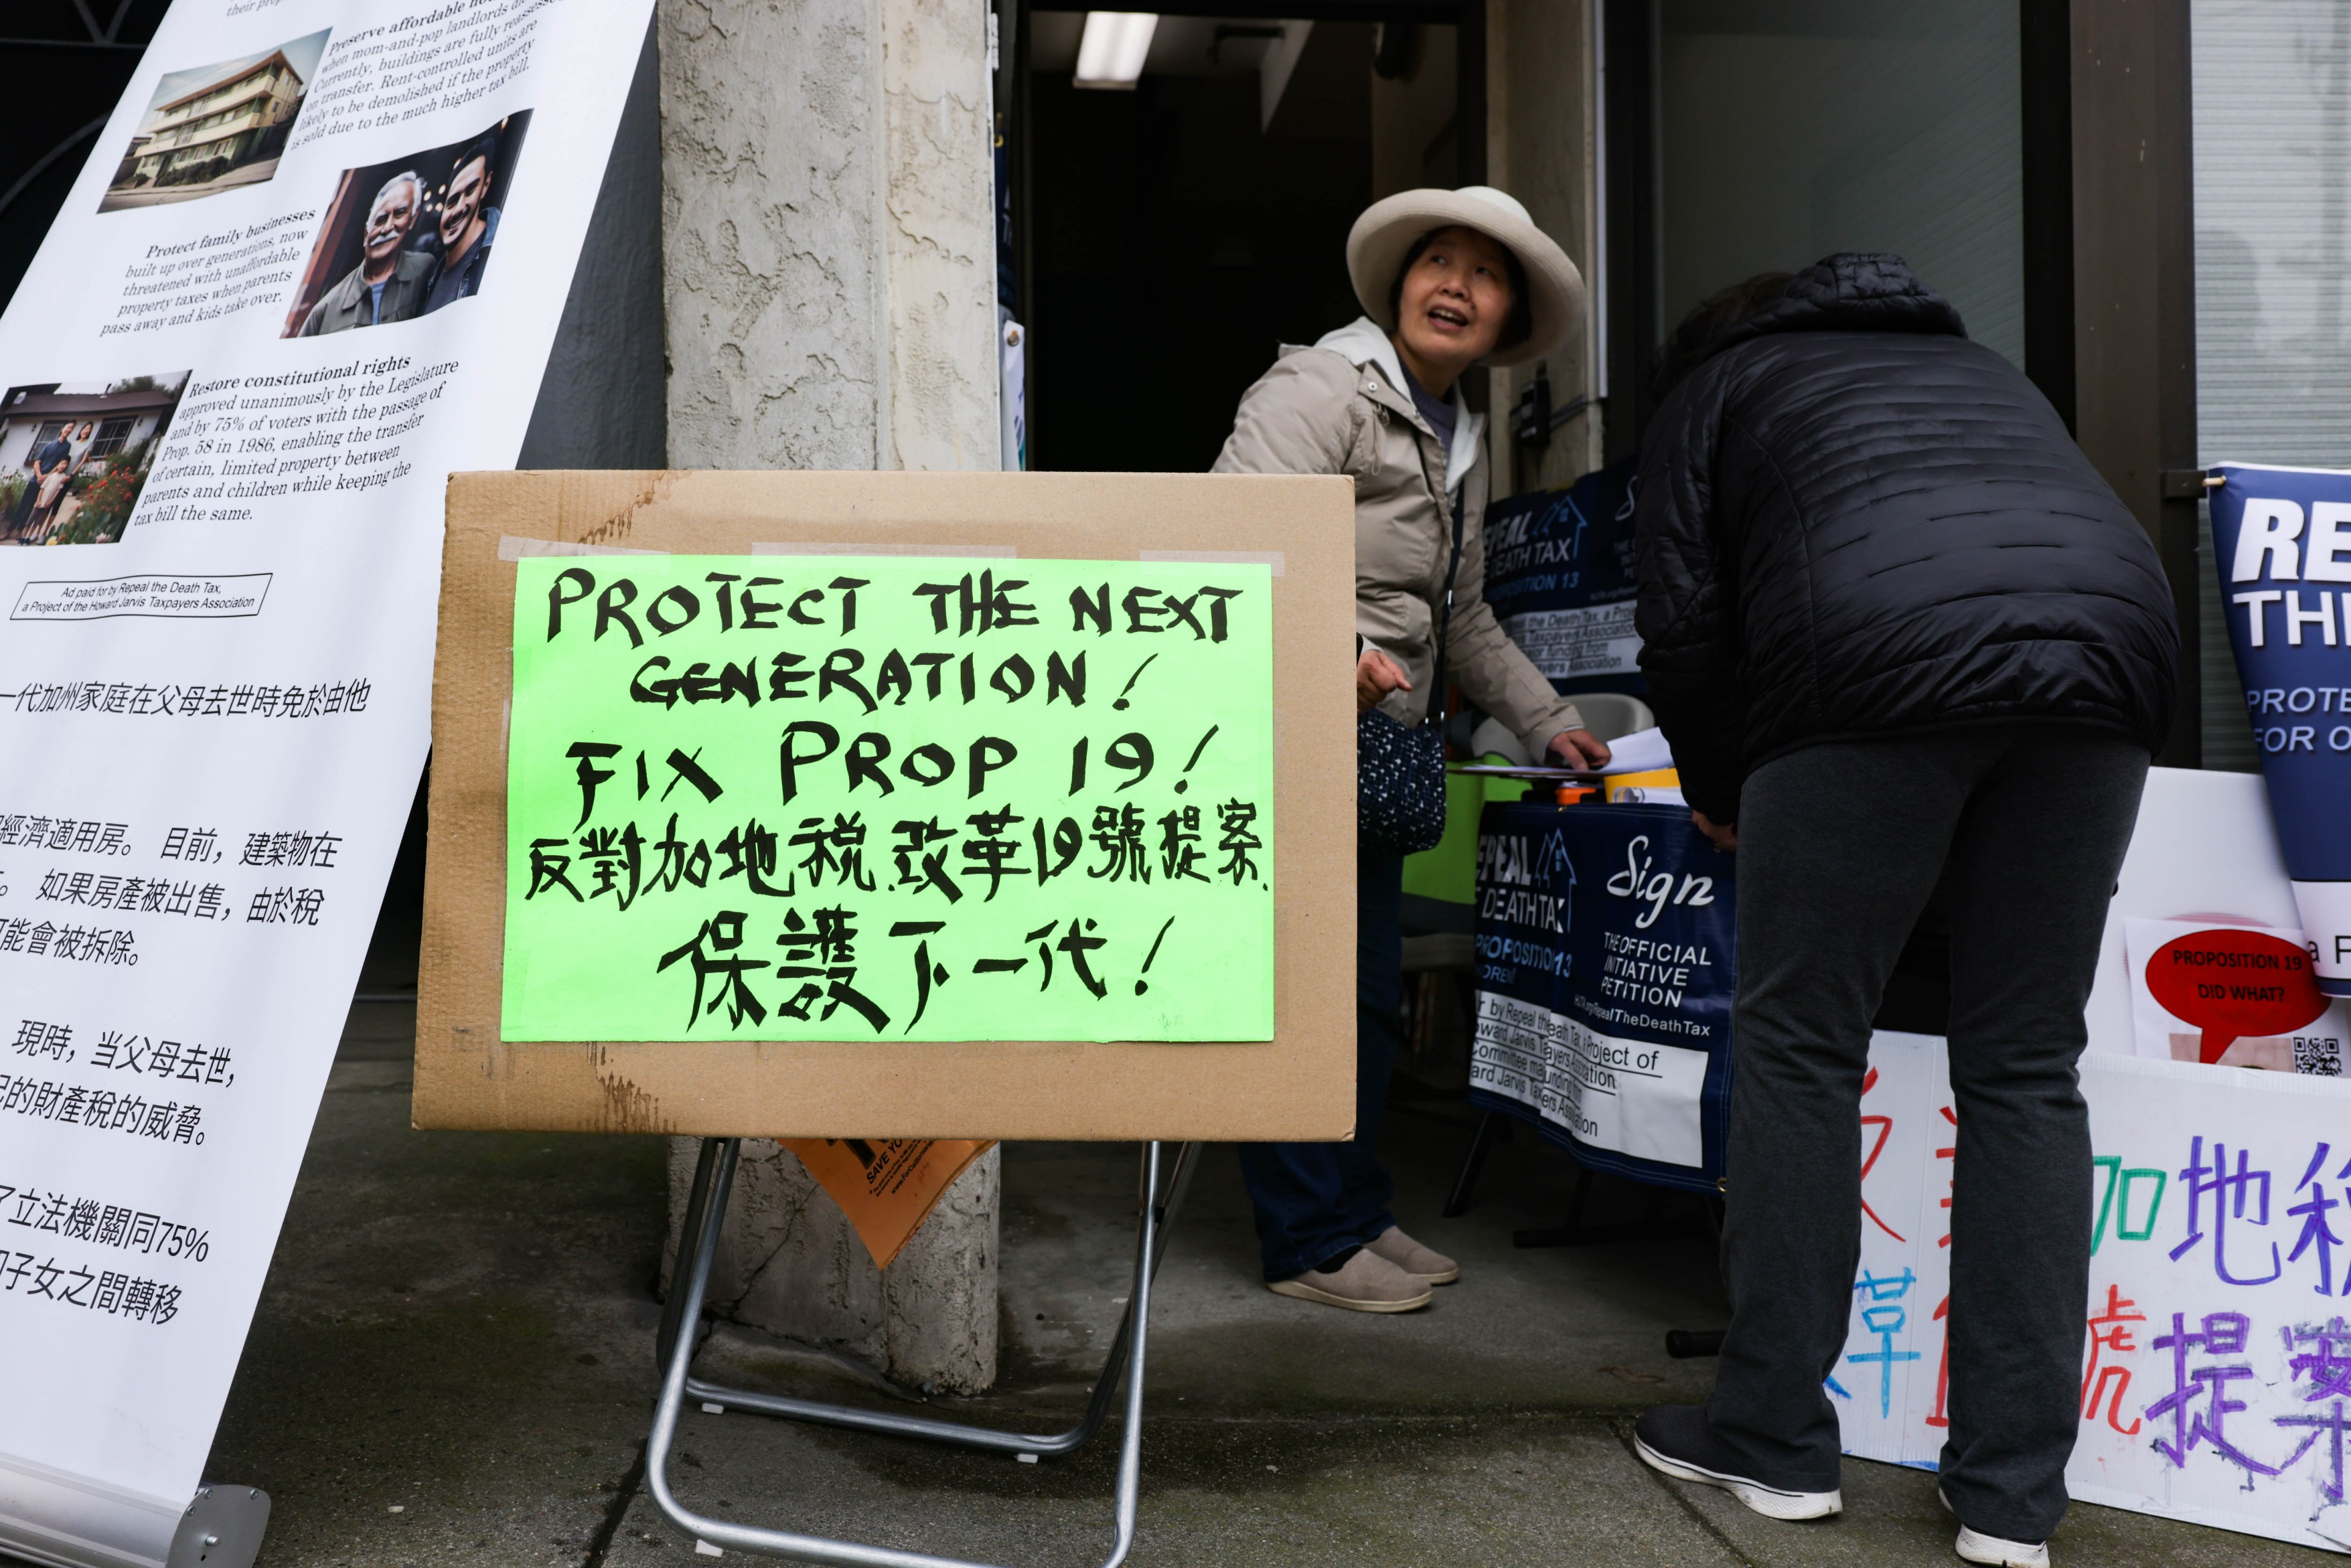 A sign displaying English and Chinese text calling for the repeal of Prop. 19.